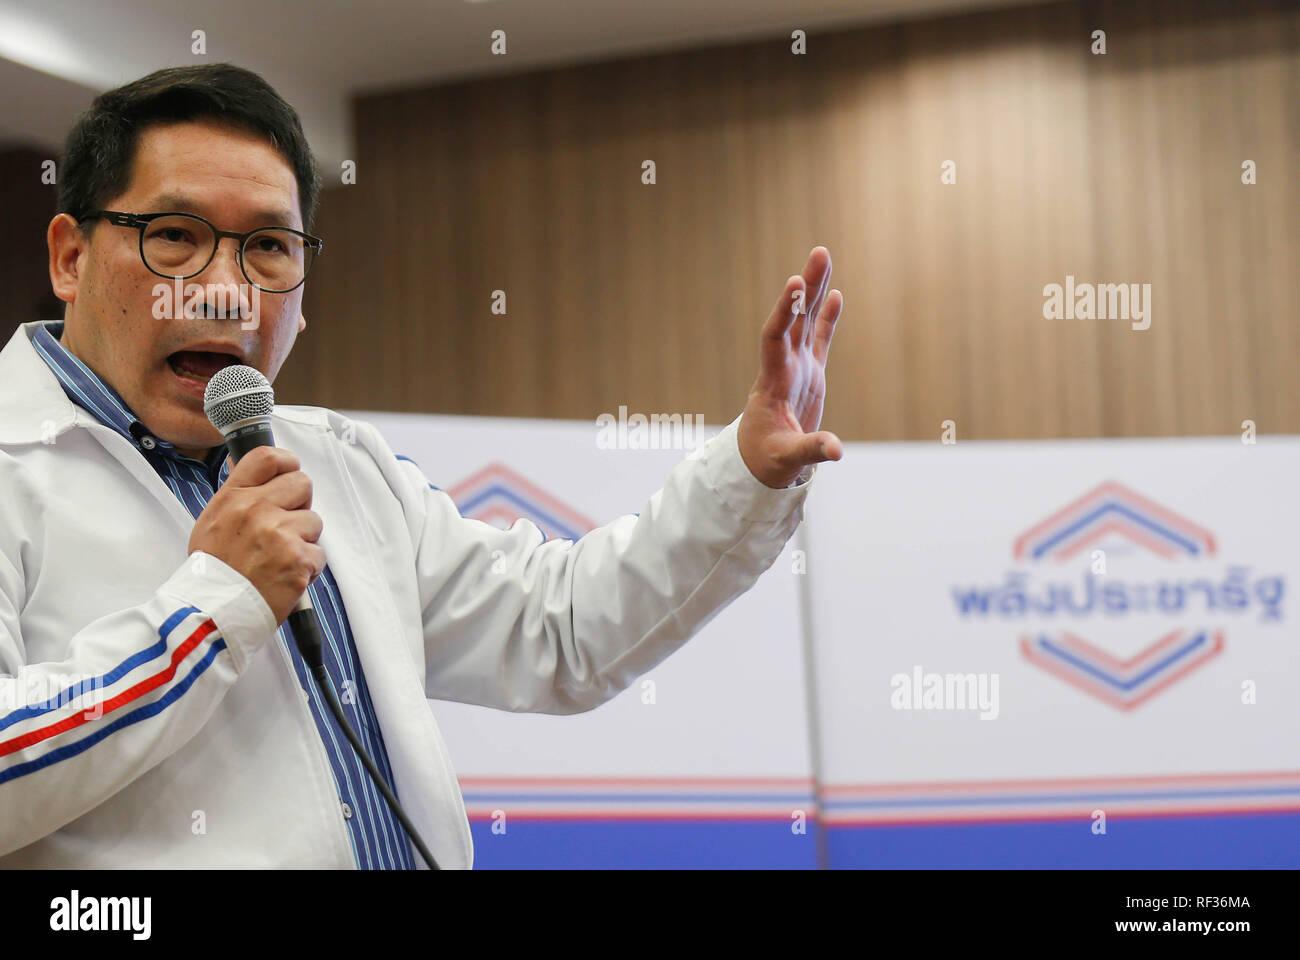 Phalang Pracharat Party leader, Uttama Savanayon speaks during a political statement at the headquarter party in Bangkok. Phalang Pracharat supports the actual Prime Minister and ex Junta Chief Prayut Chan-O-Cha, who has been at the head of the country since the 2014 coup. Several politic parties support Prayut Chan-O-Cha, but the Phalang Pracharat Party is seen as the 'official pro-junta party' or also 'pro-Prayut party' simply because many of the party leaders are also junta cabinet members and advisors. Stock Photo